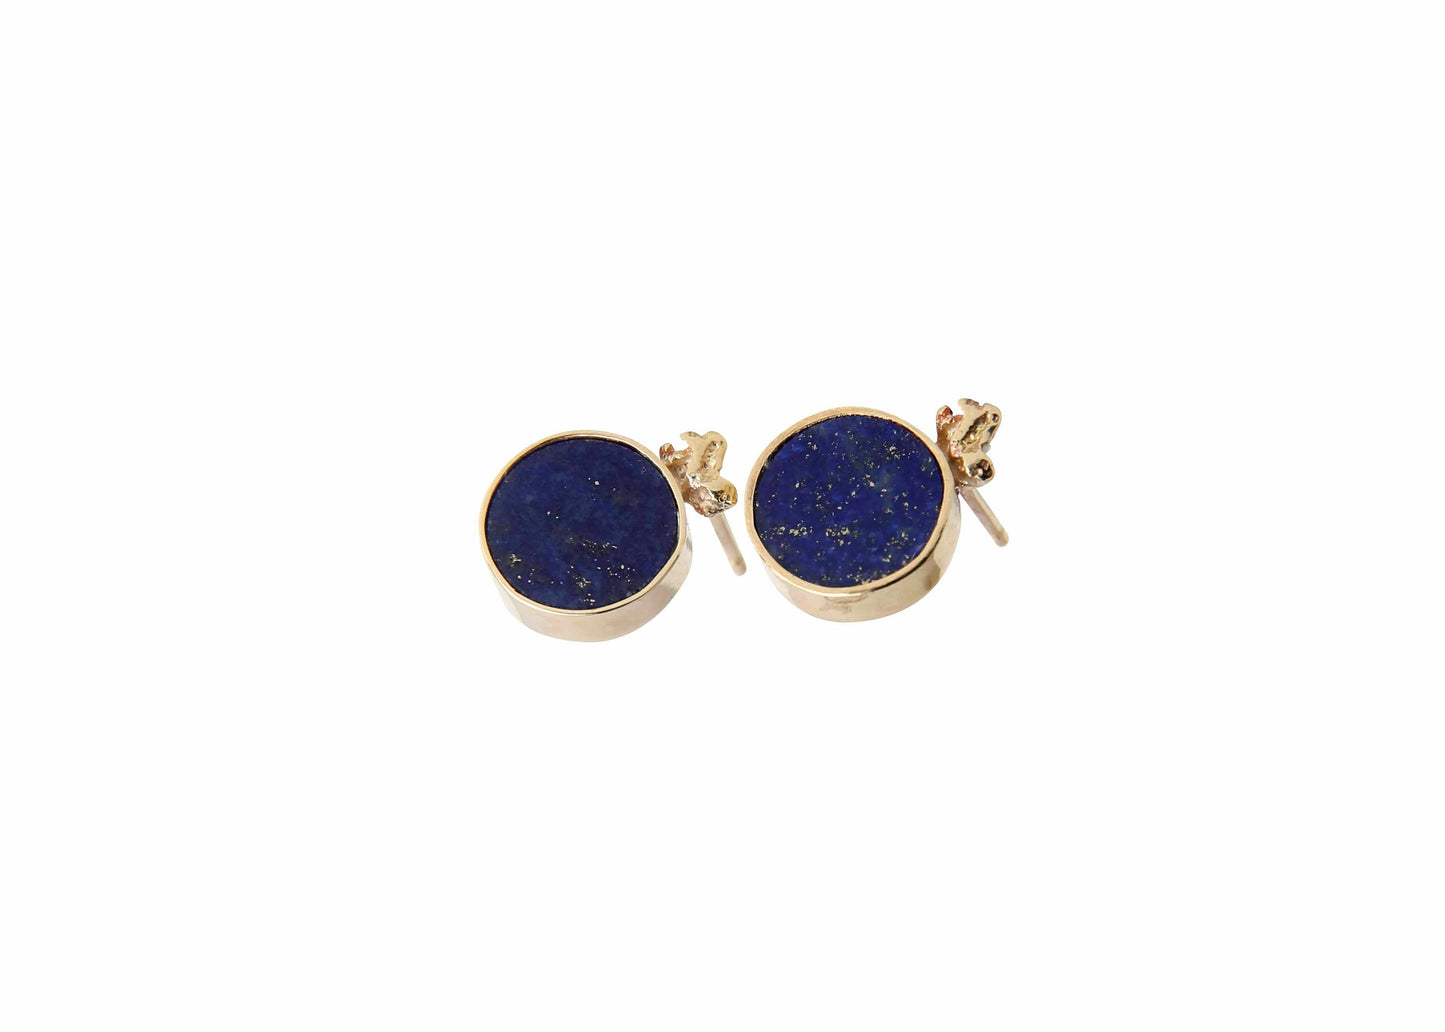 Blue lapis lazuli and gold disc stud earrings